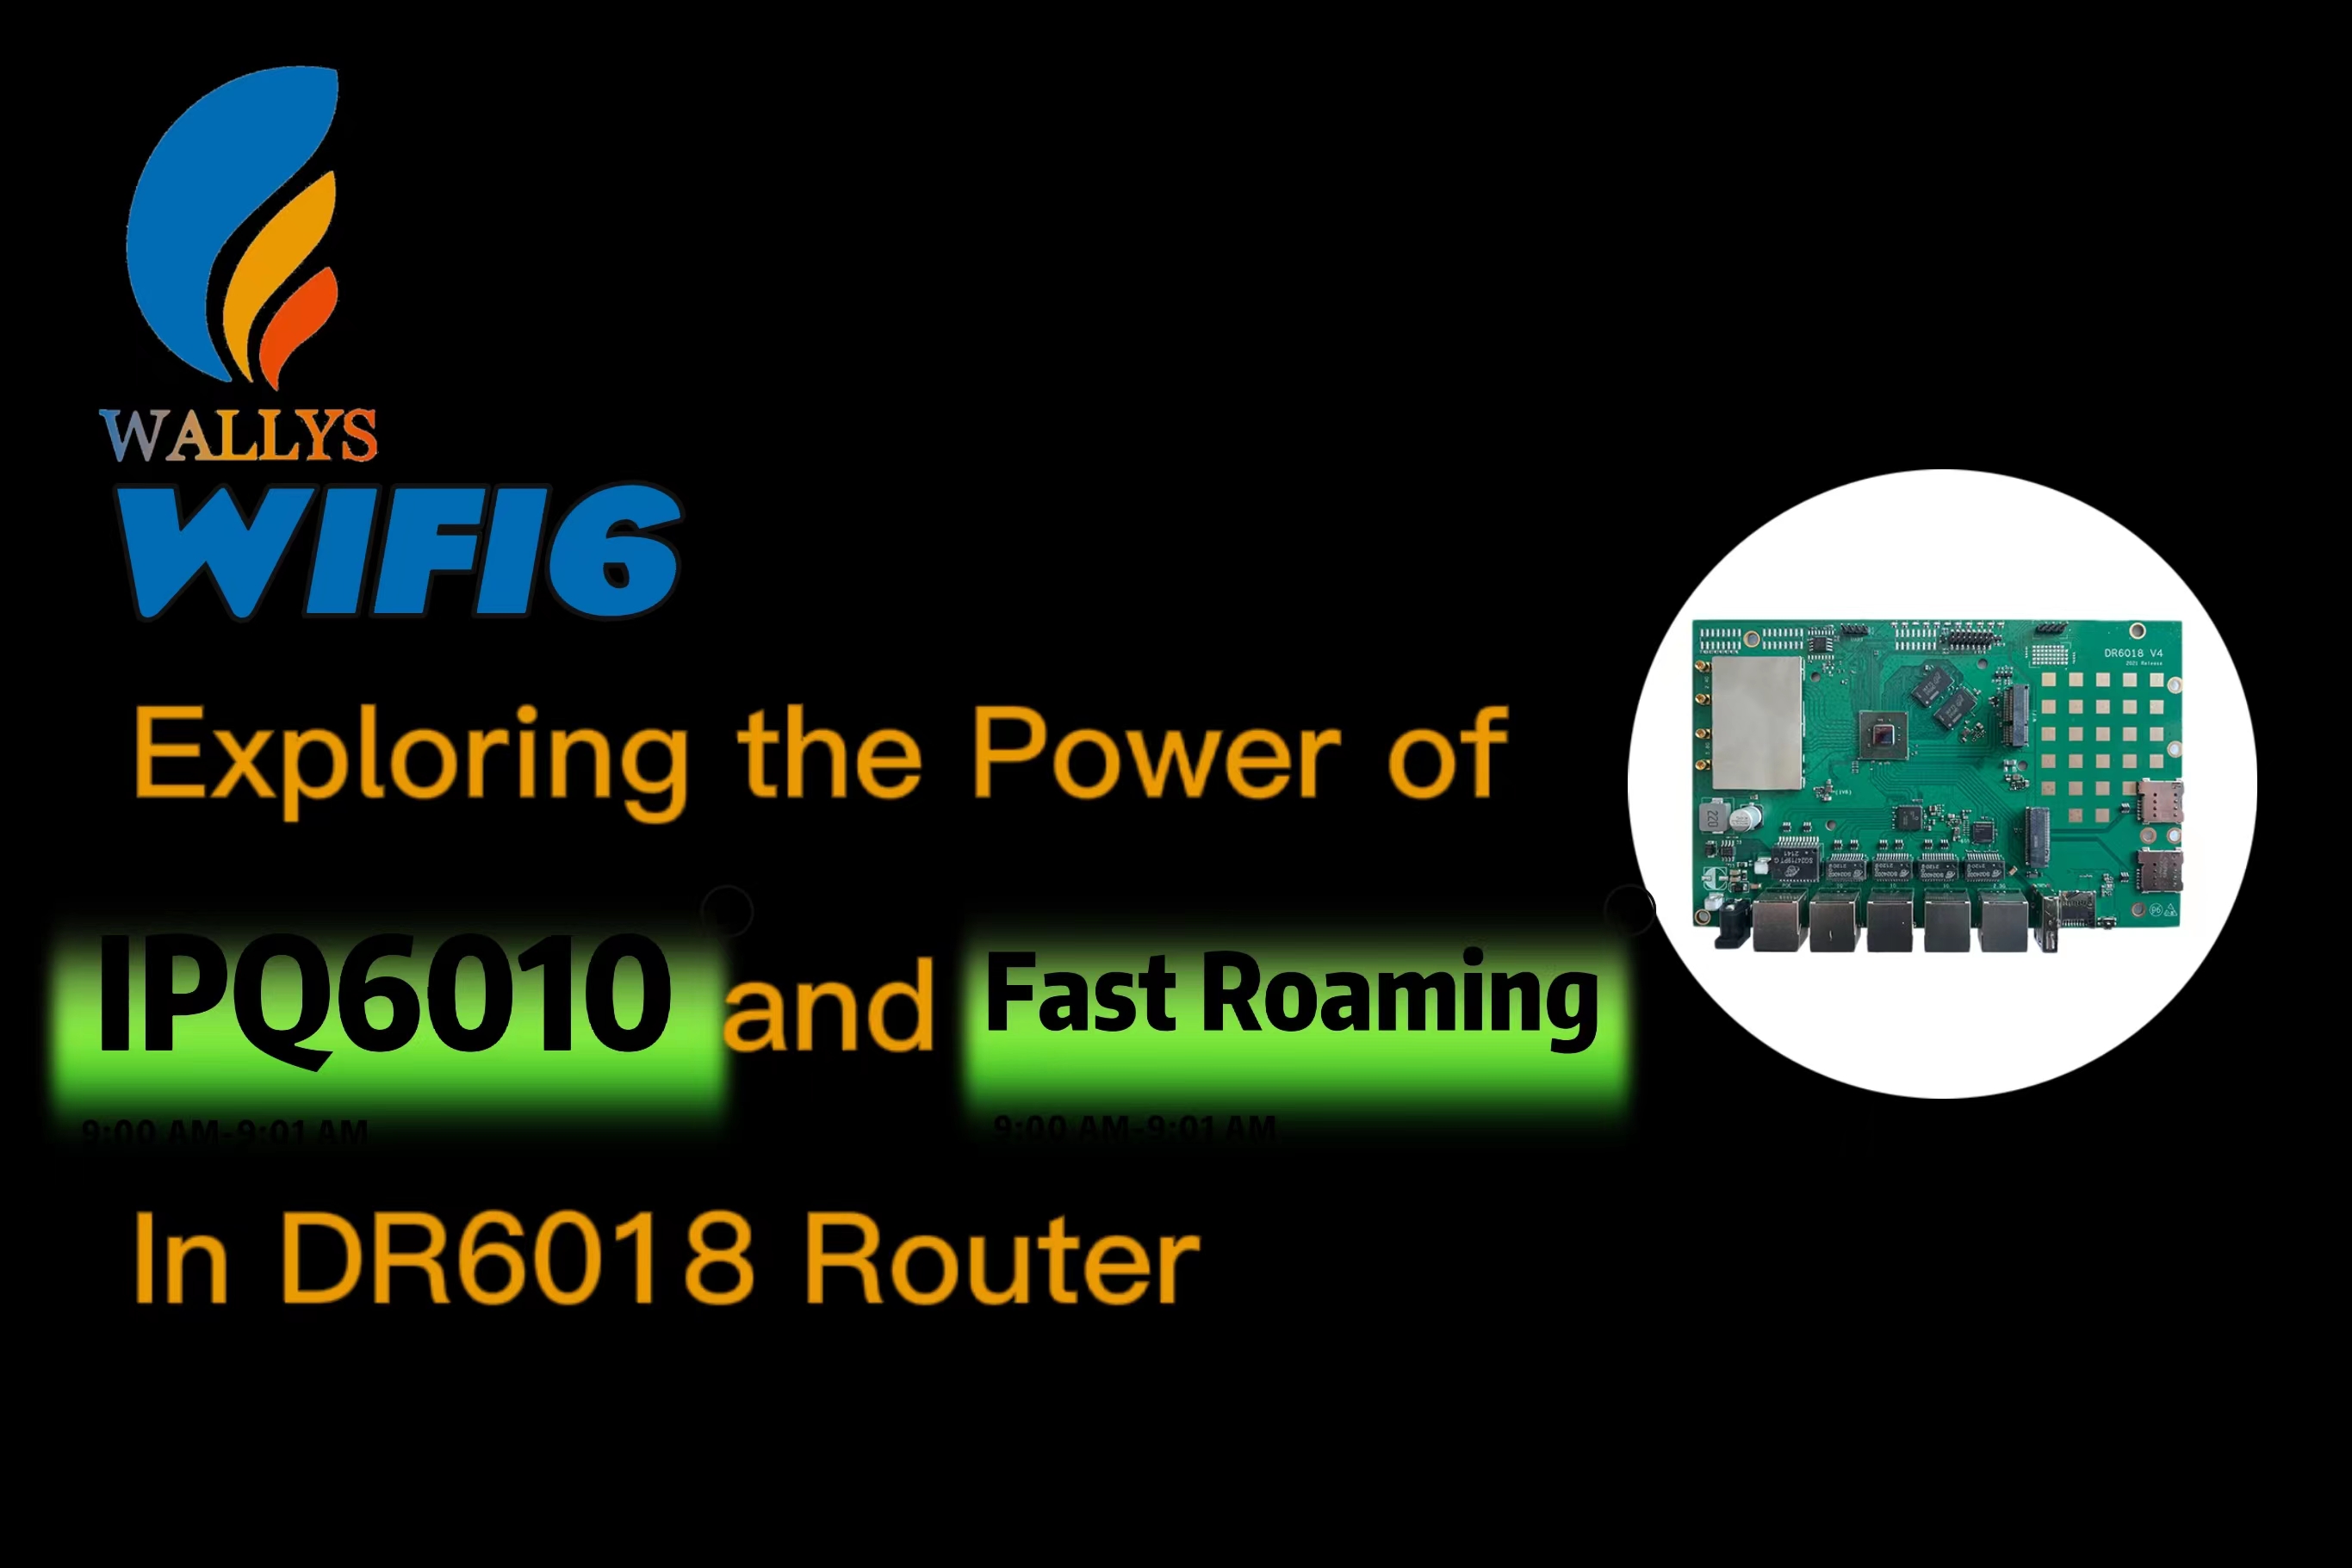 Fast Roaming with Qualcomm IPQ6010:Industrial-grade Applications